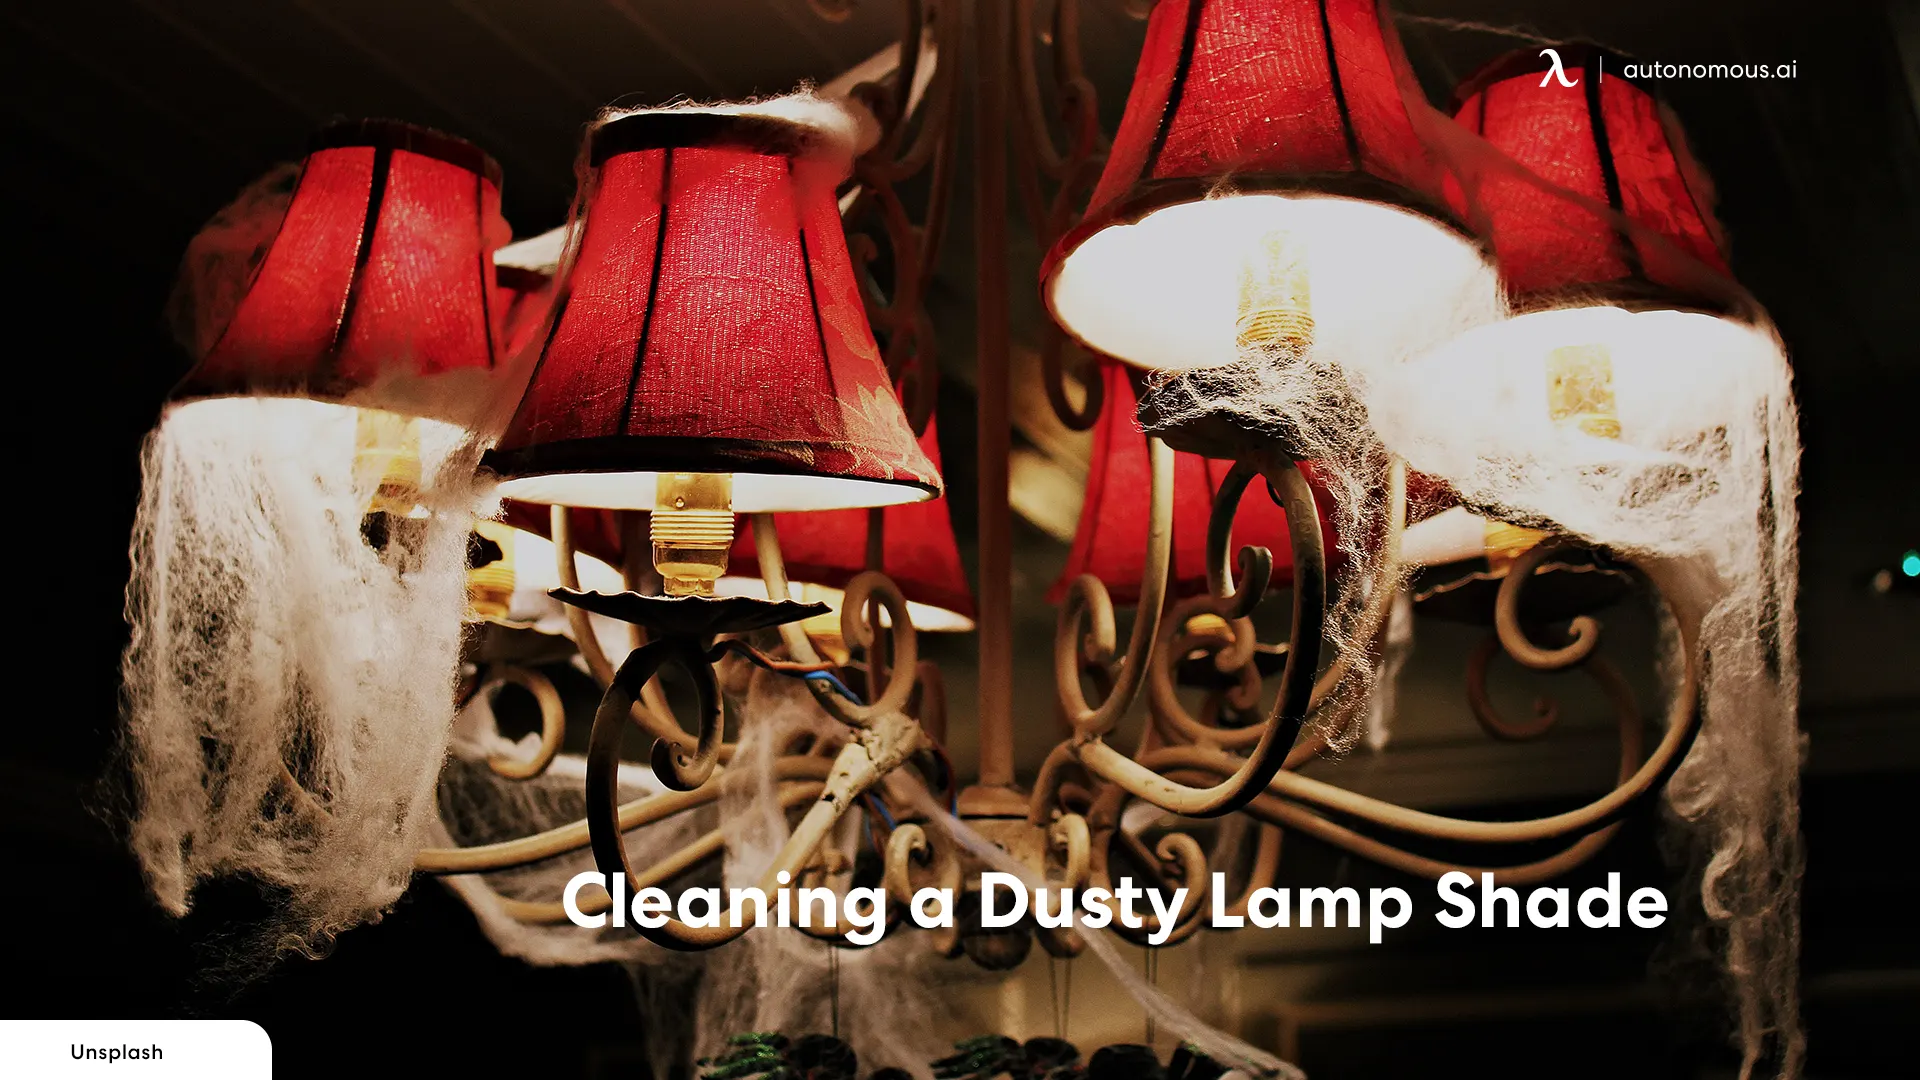 Cleaning a Dusty Lamp Shade